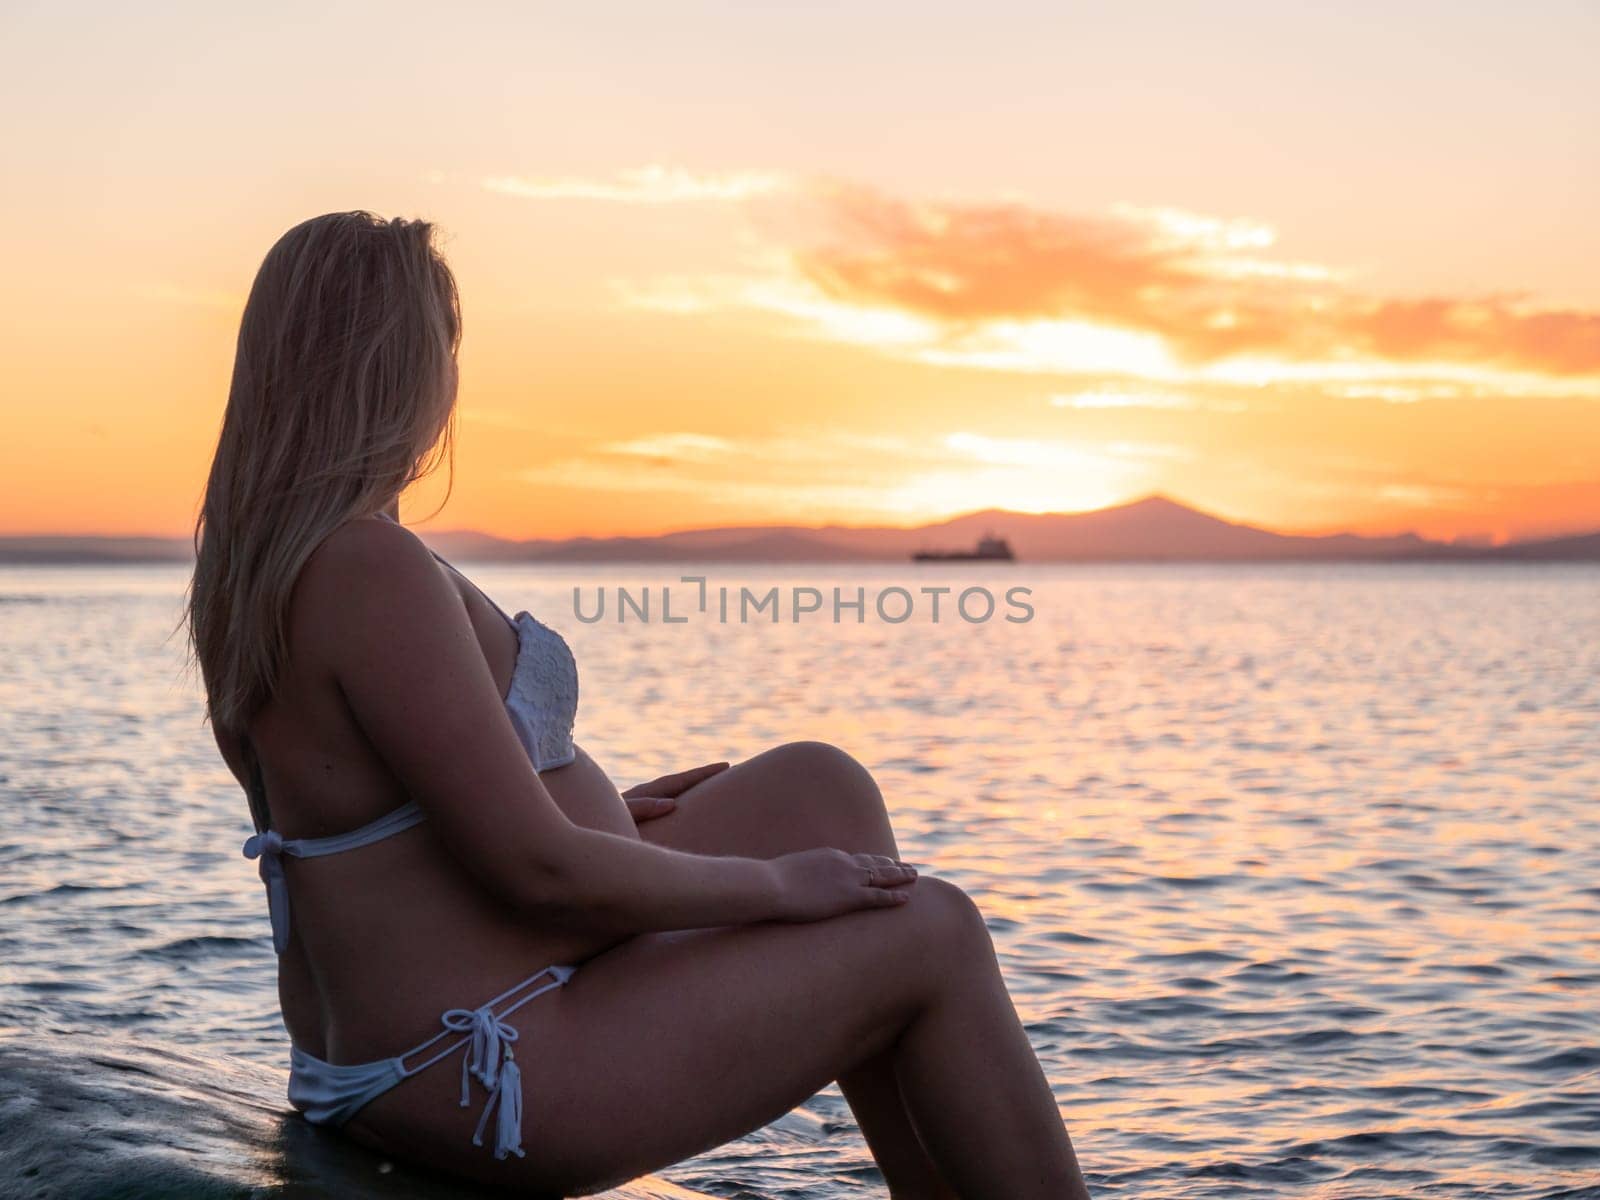 A pregnant woman in a white bikini sits on a rocky beach at sunrise. The background features calm water and a distant mountain range.